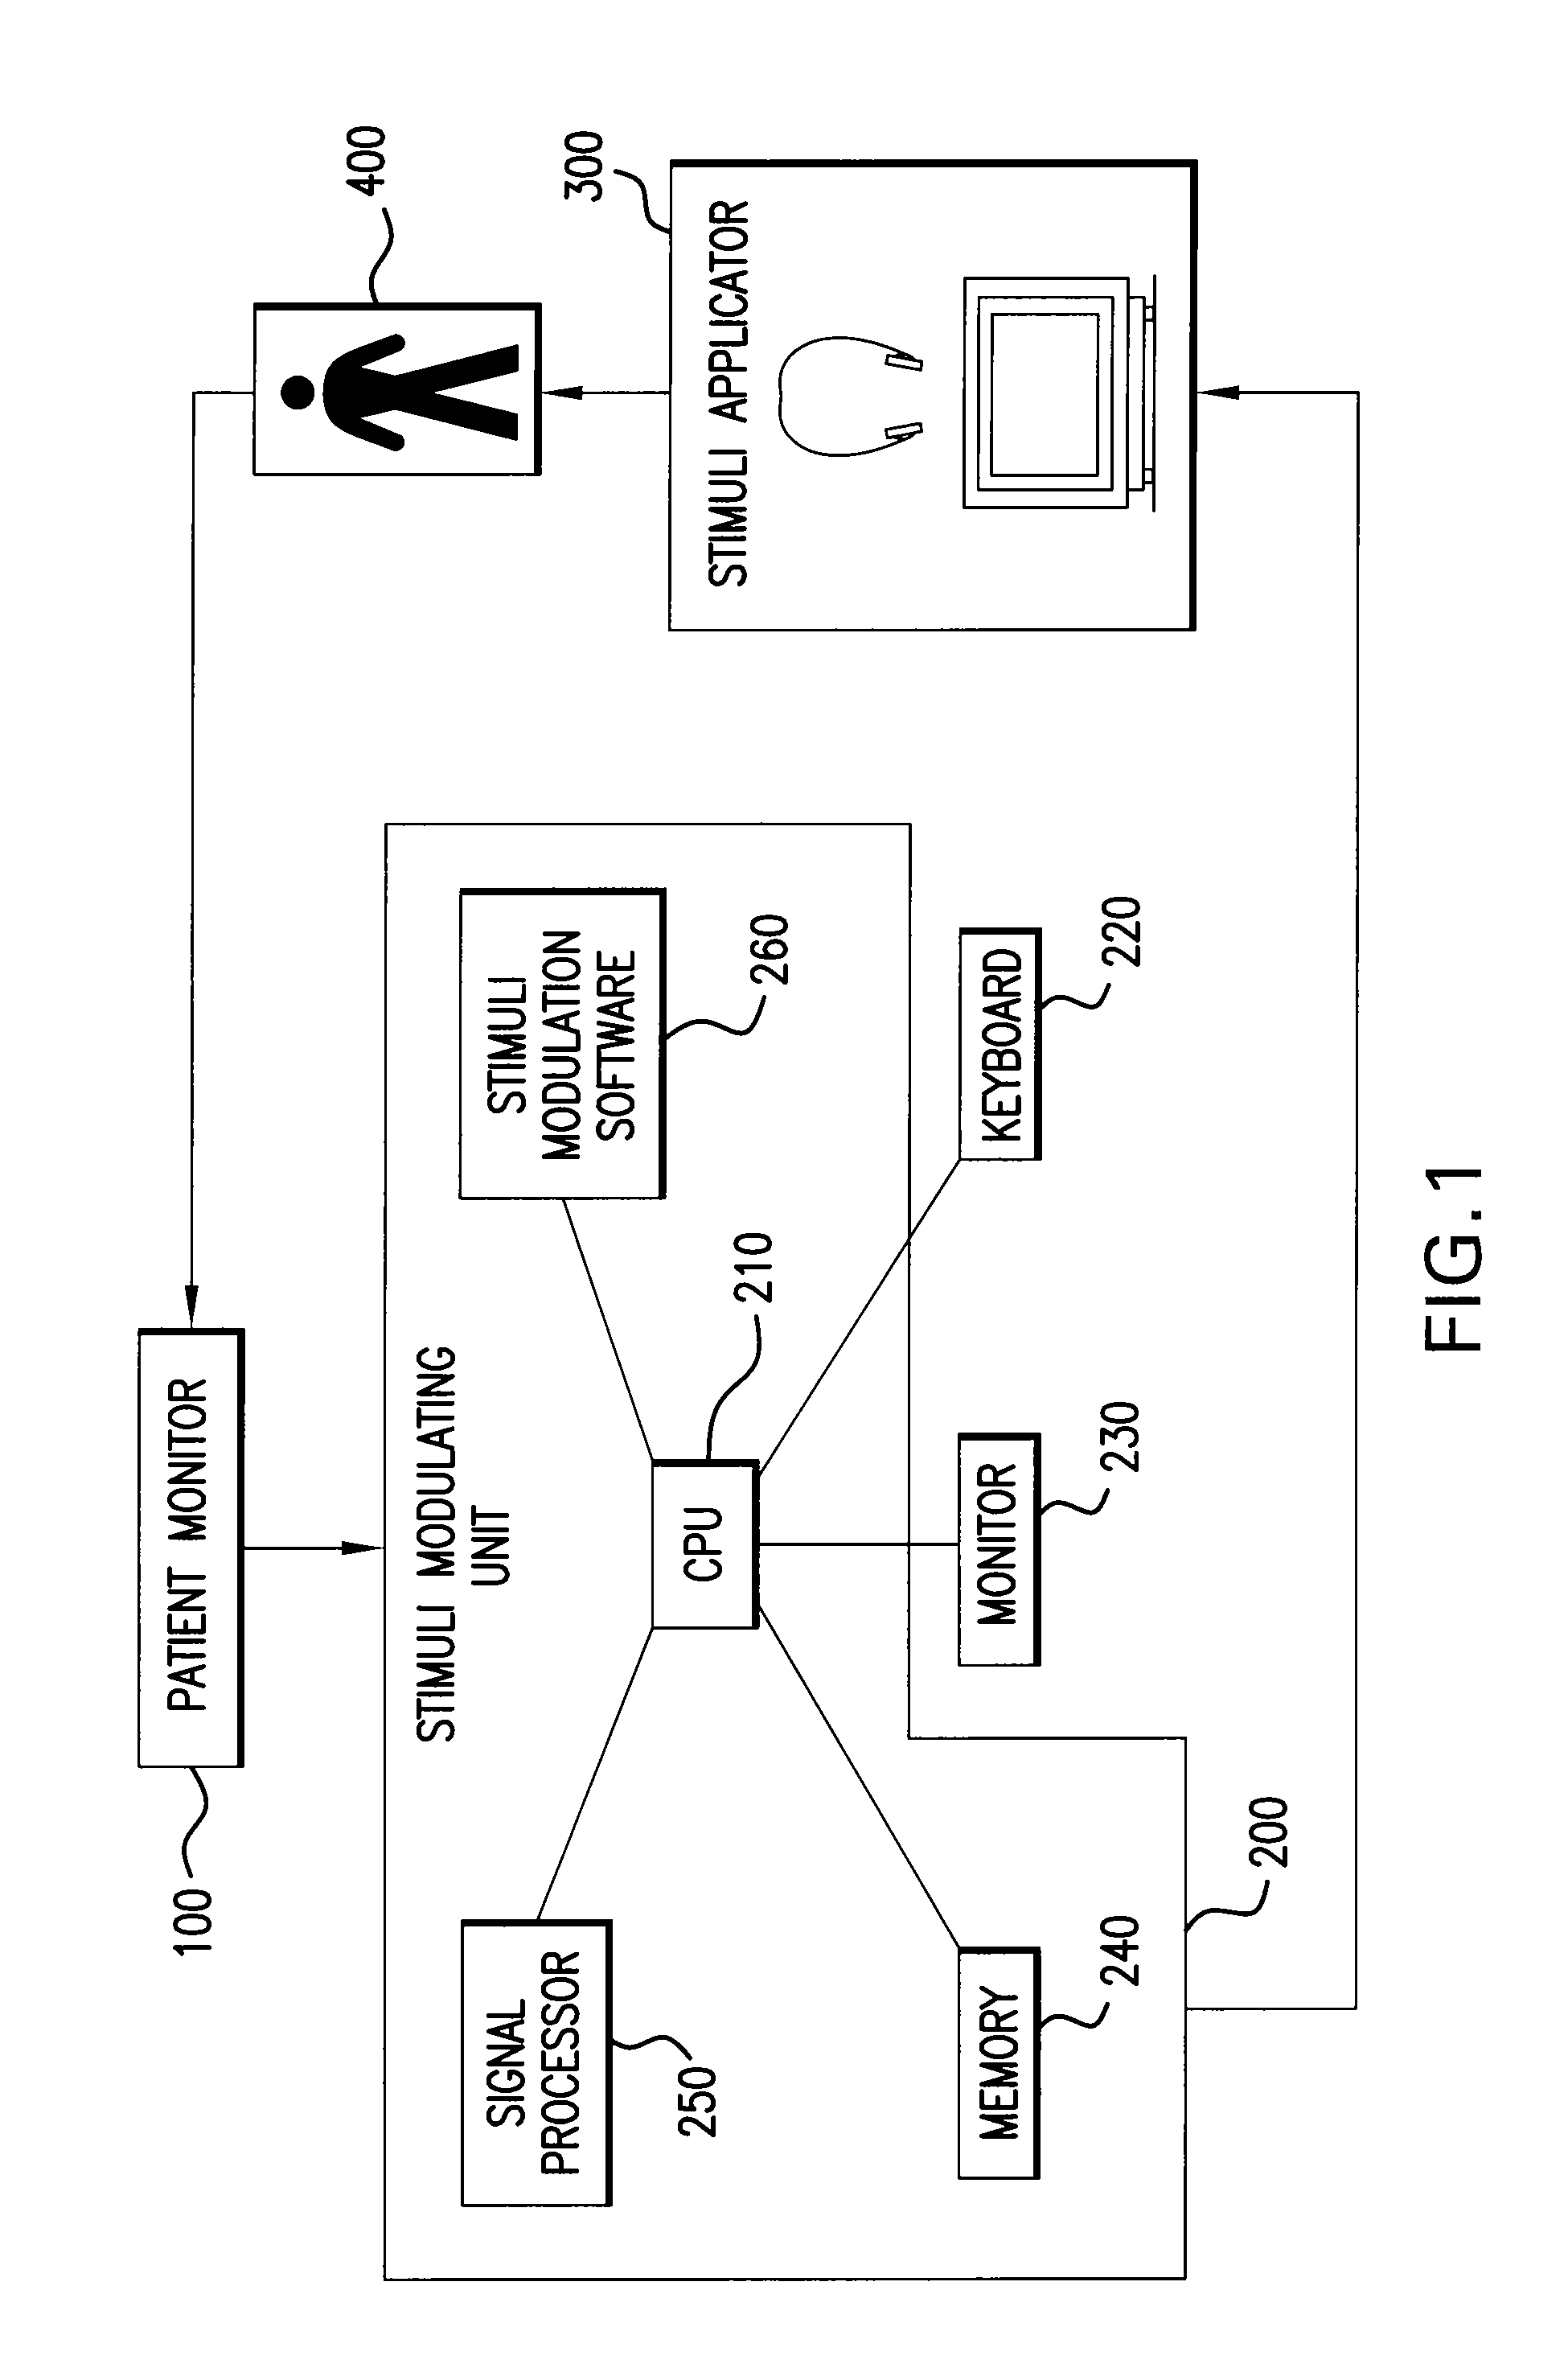 Method and apparatus for affecting the autonomic nervous system